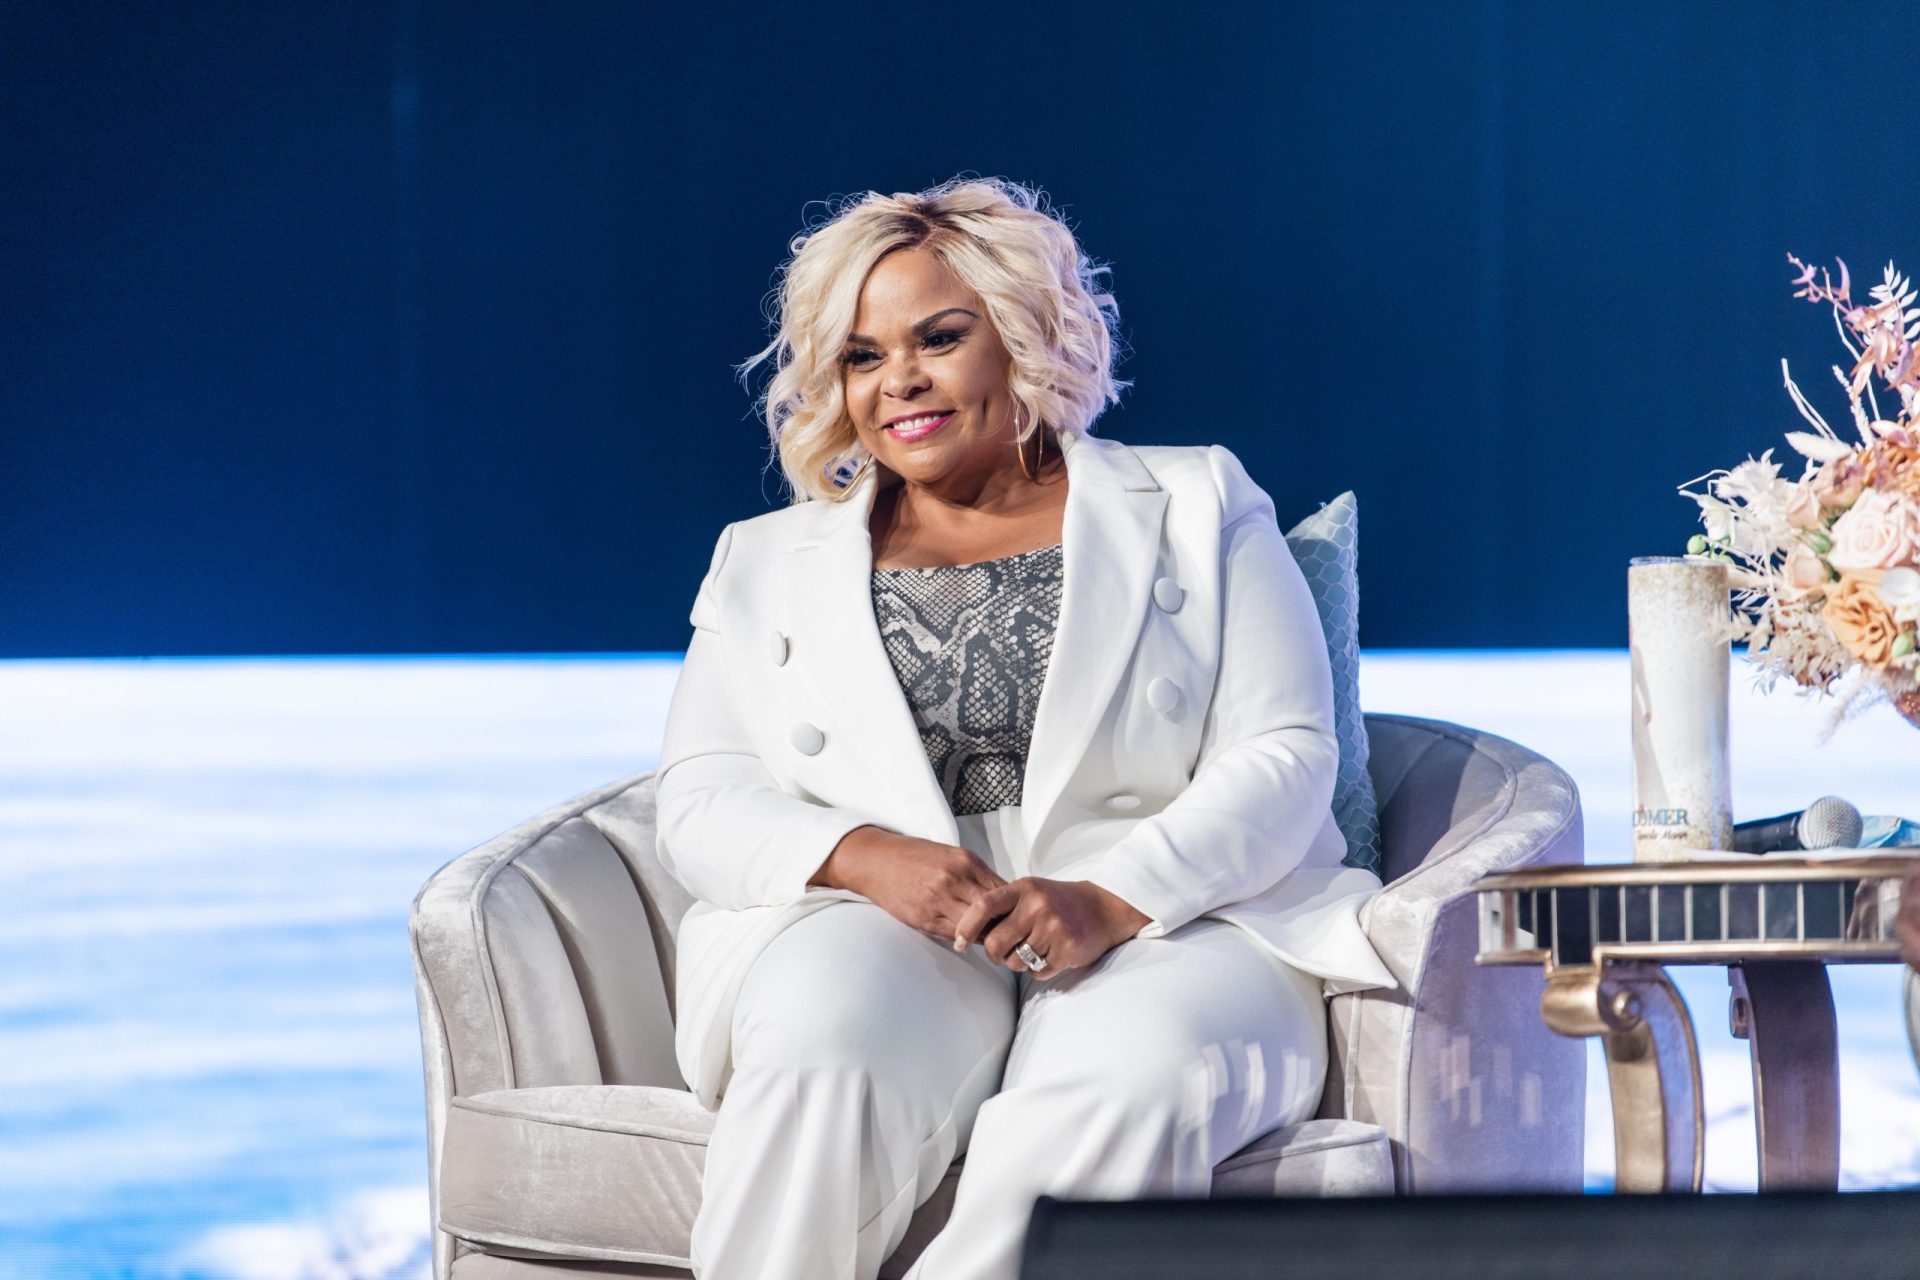 Tamela Xxx Videos - Actor and award-winning singer Tamela Mann shares personal journey on new  album - Rolling Out